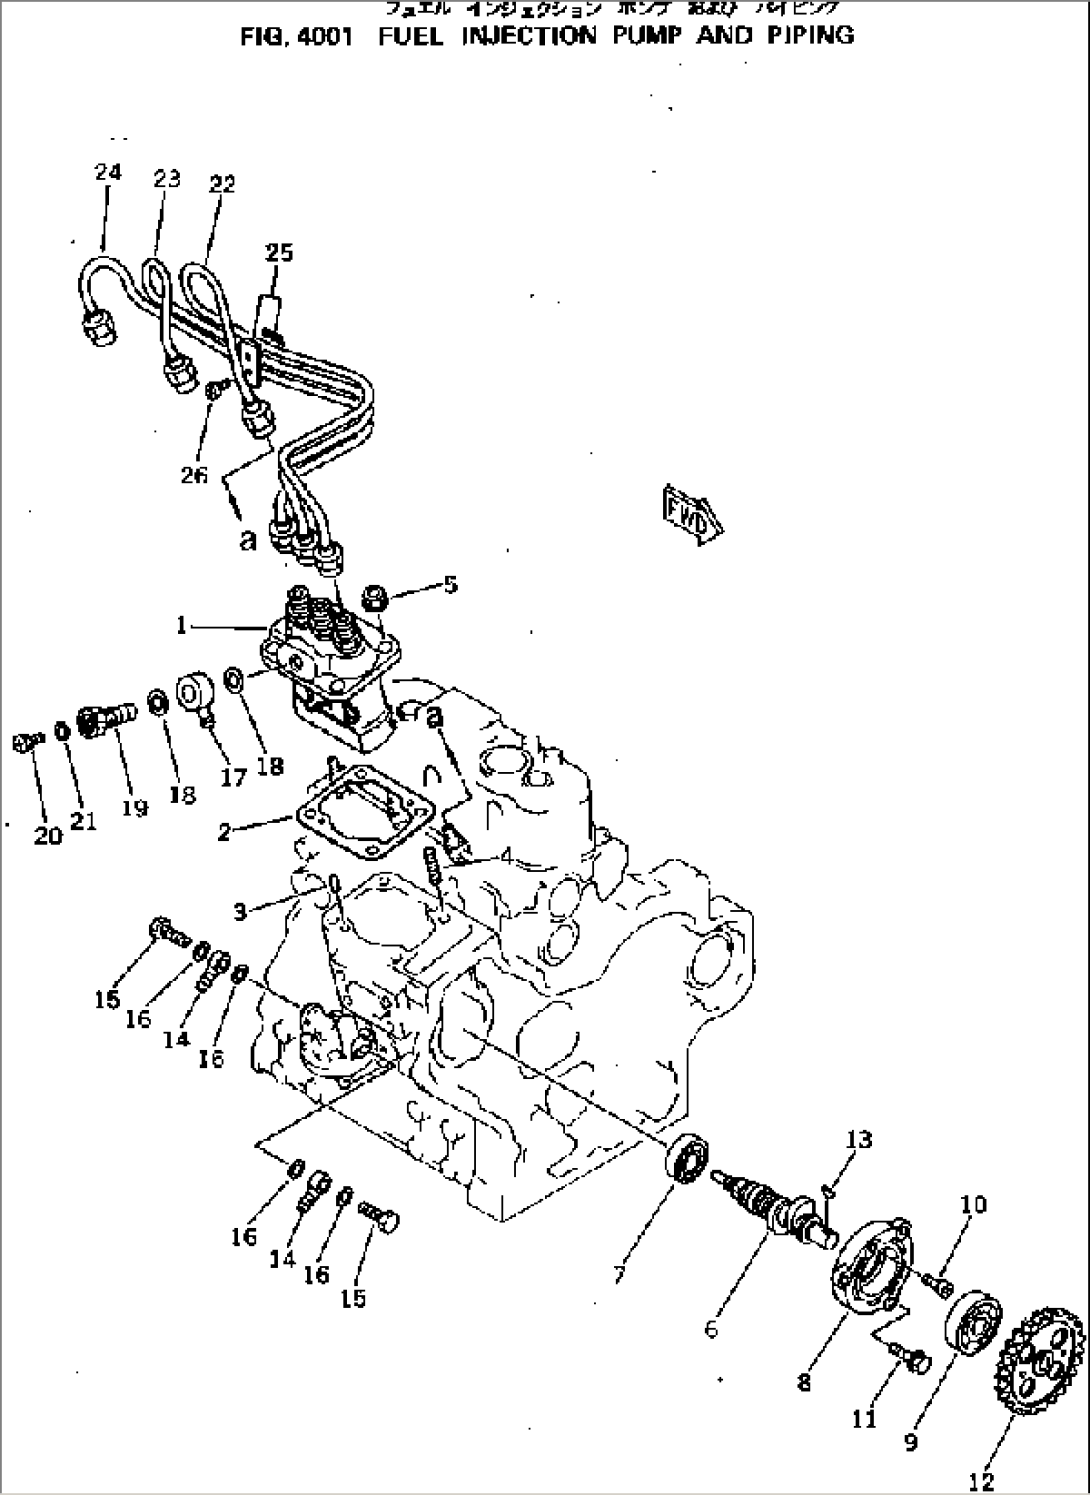 FUEL INJECTION PUMP AND PIPING